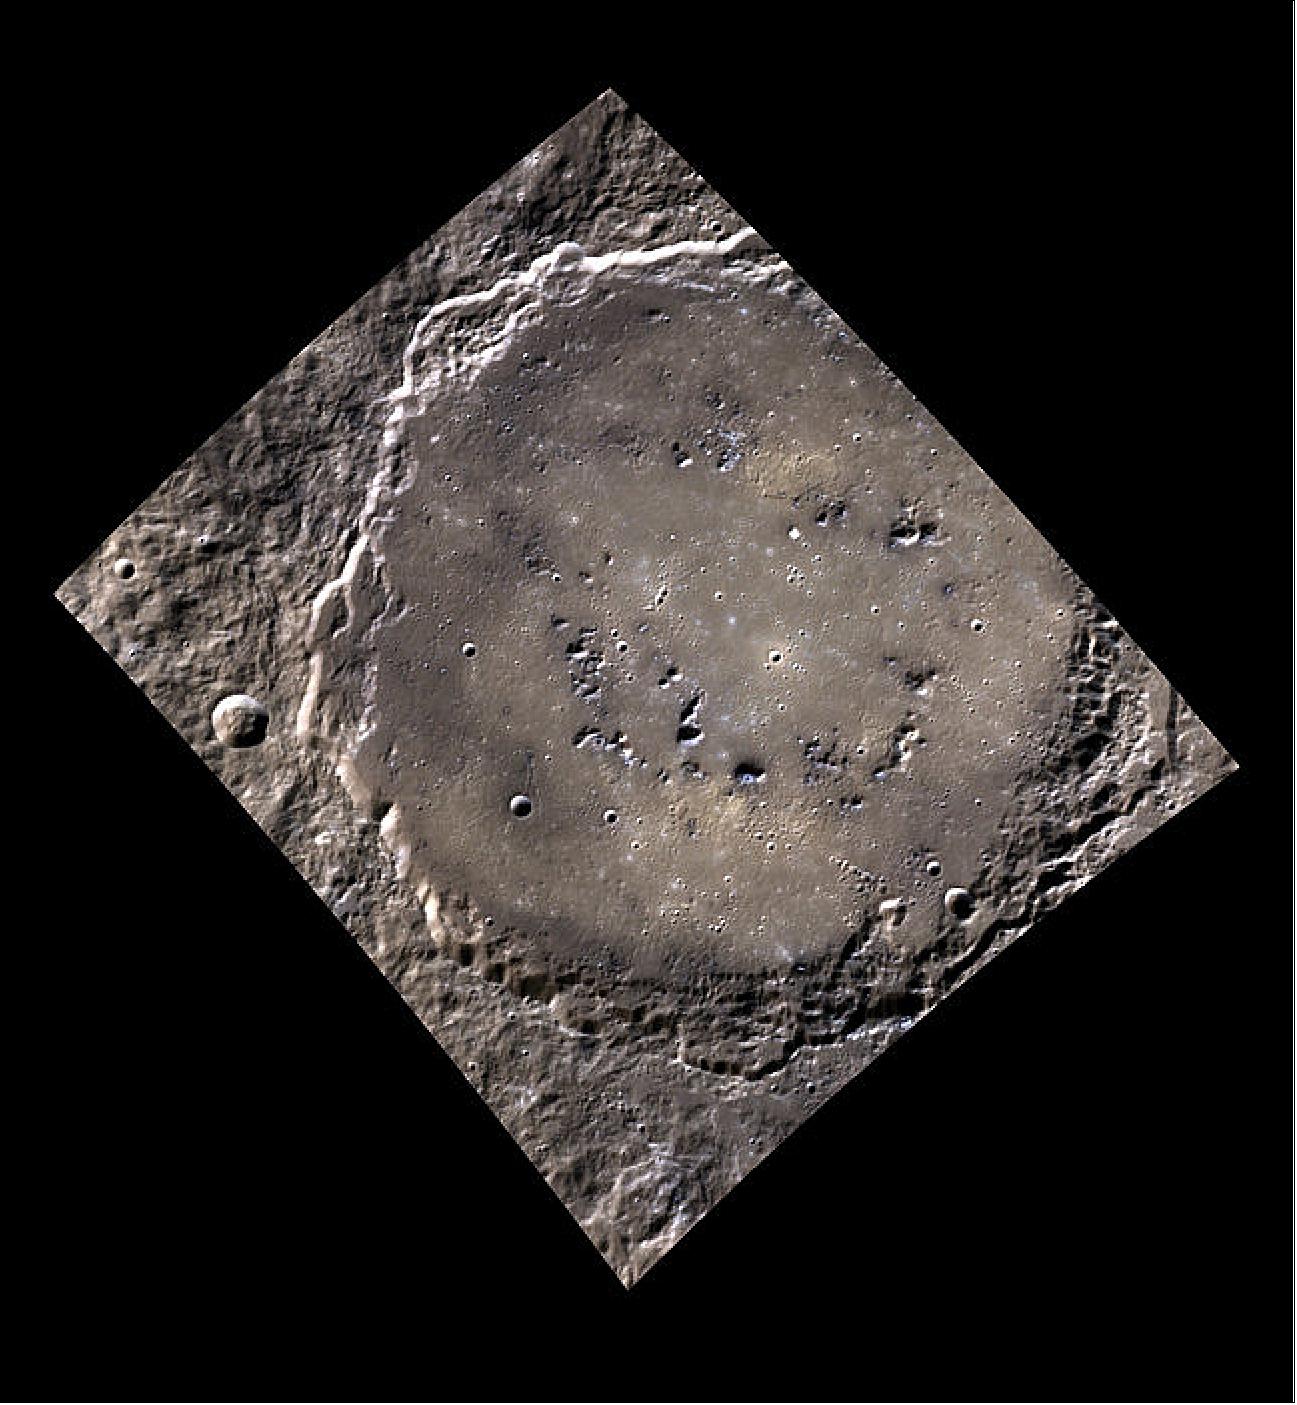 Figure 44: Joana and her colleagues used spacecraft observations from five craters with magnetic irregularities. One of the craters, named Rustaveli and found in the northern hemisphere, is pictured here. The craters were suspected to have formed during a time with a different core magnetic field orientation than that of today. The researchers modeled Mercury's ancient magnetic field based on the crater data to estimate the potential locations for the poles in the past (image credit: NASA/Johns Hopkins University Applied Physics Laboratory/Carnegie Institution of Washington)